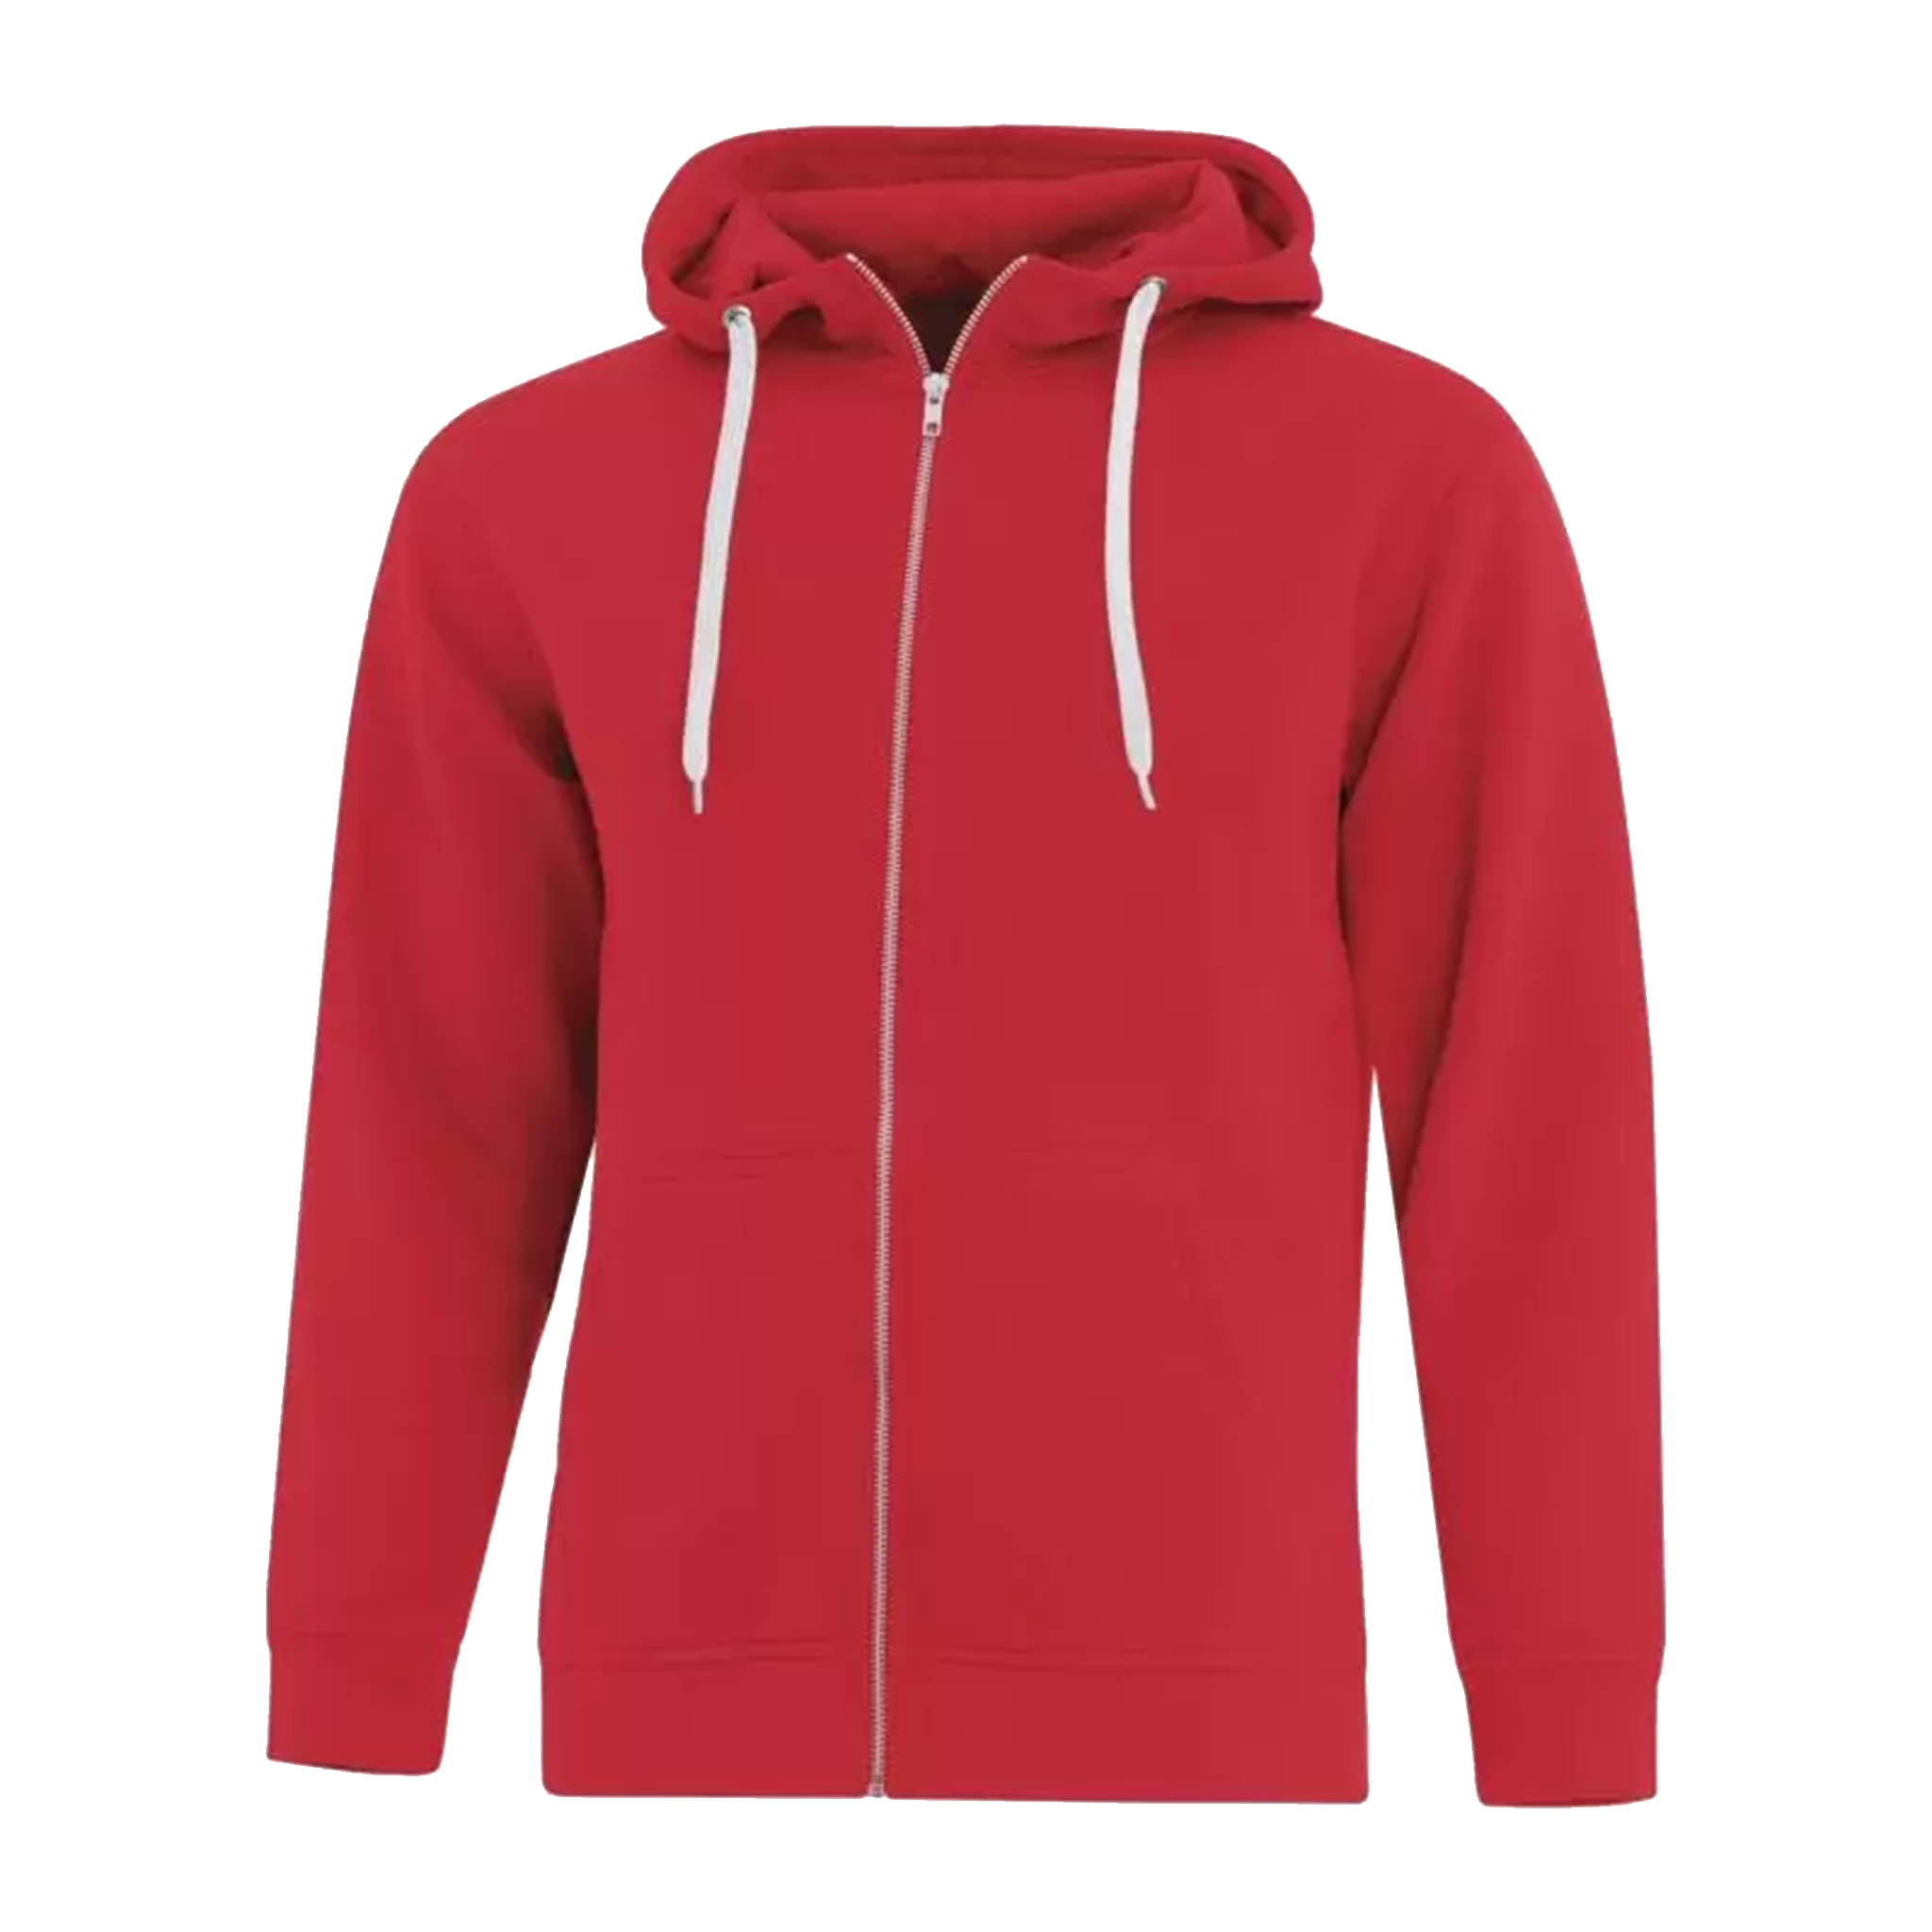 ATC Esactive Core Full Zip Hoodie - Adult Unisex Sizing XS-4XL - Red